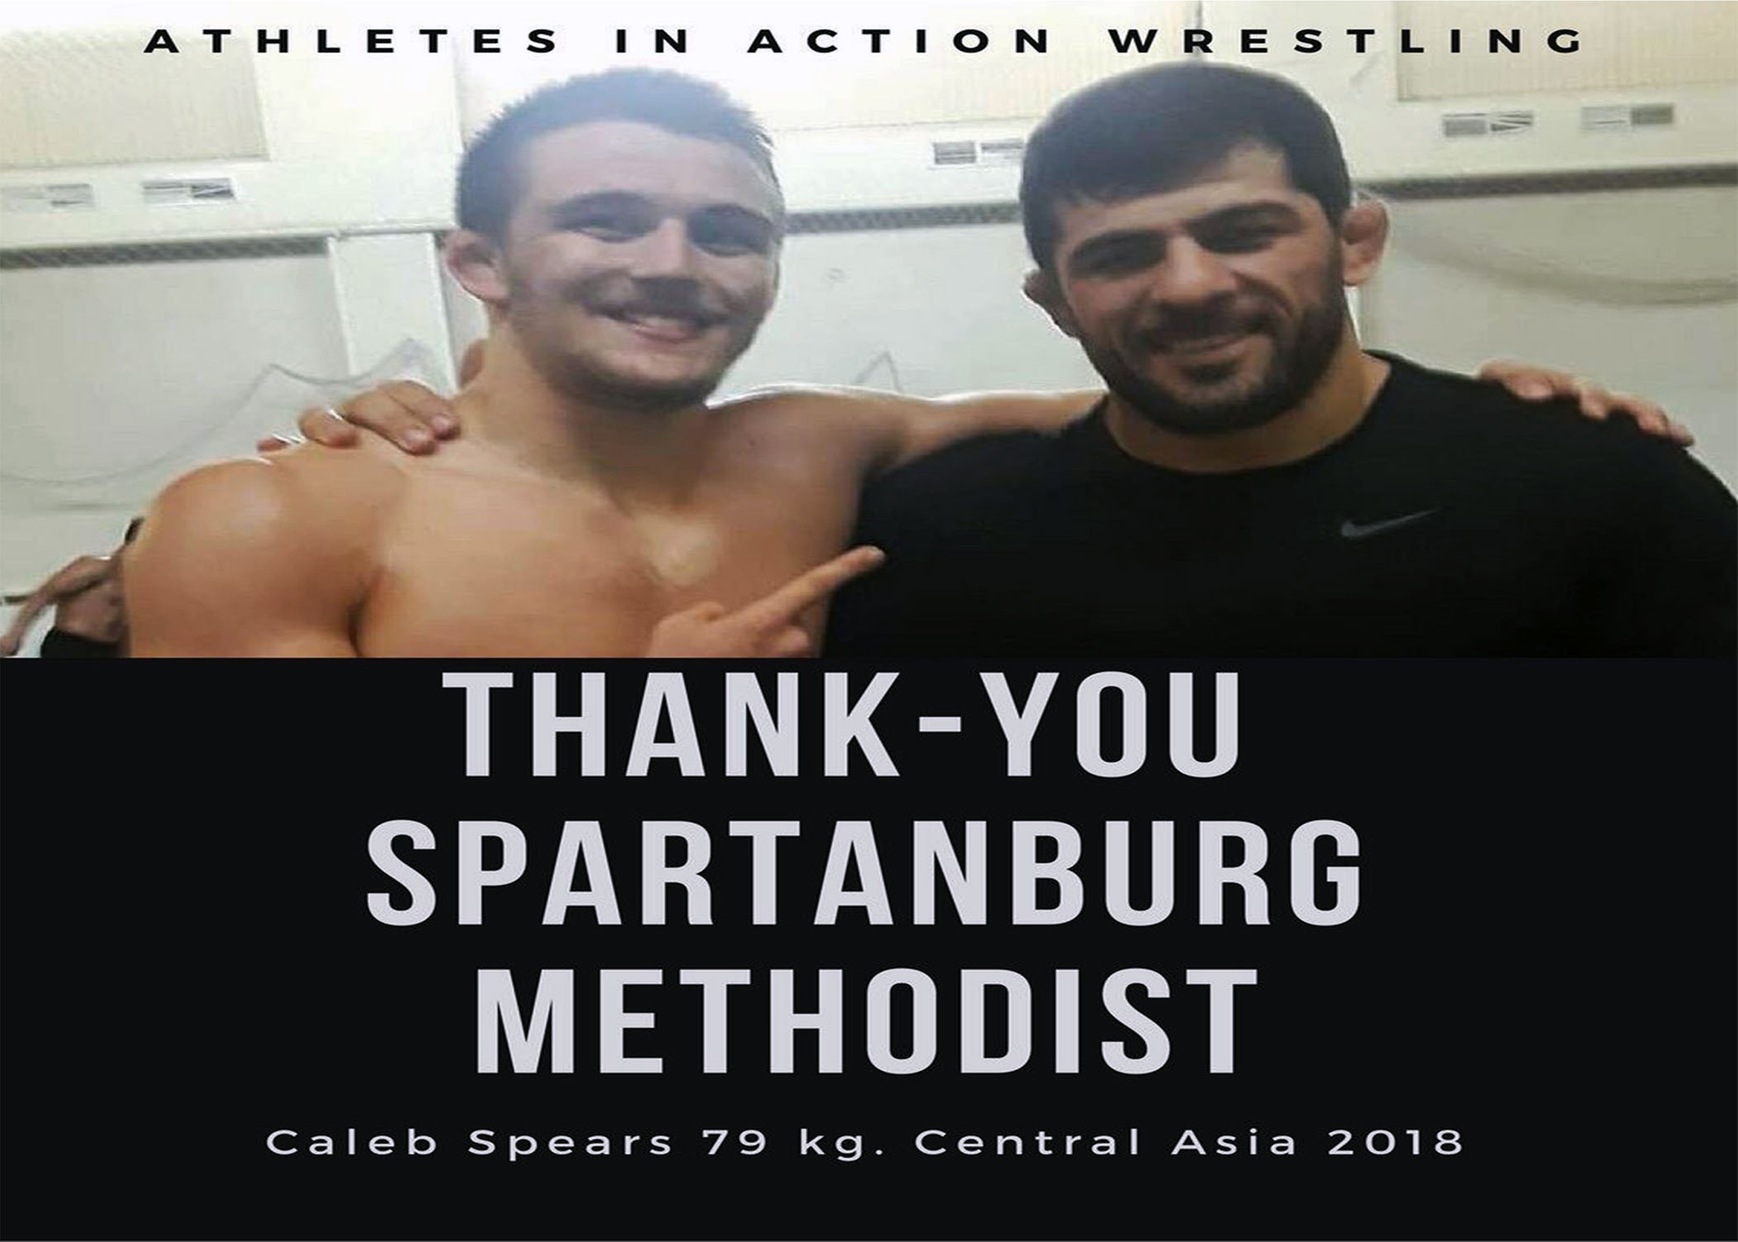 Caleb Spears Represents SMC & Team USA on Mission Based Wrestling Trip to Kazakhstan